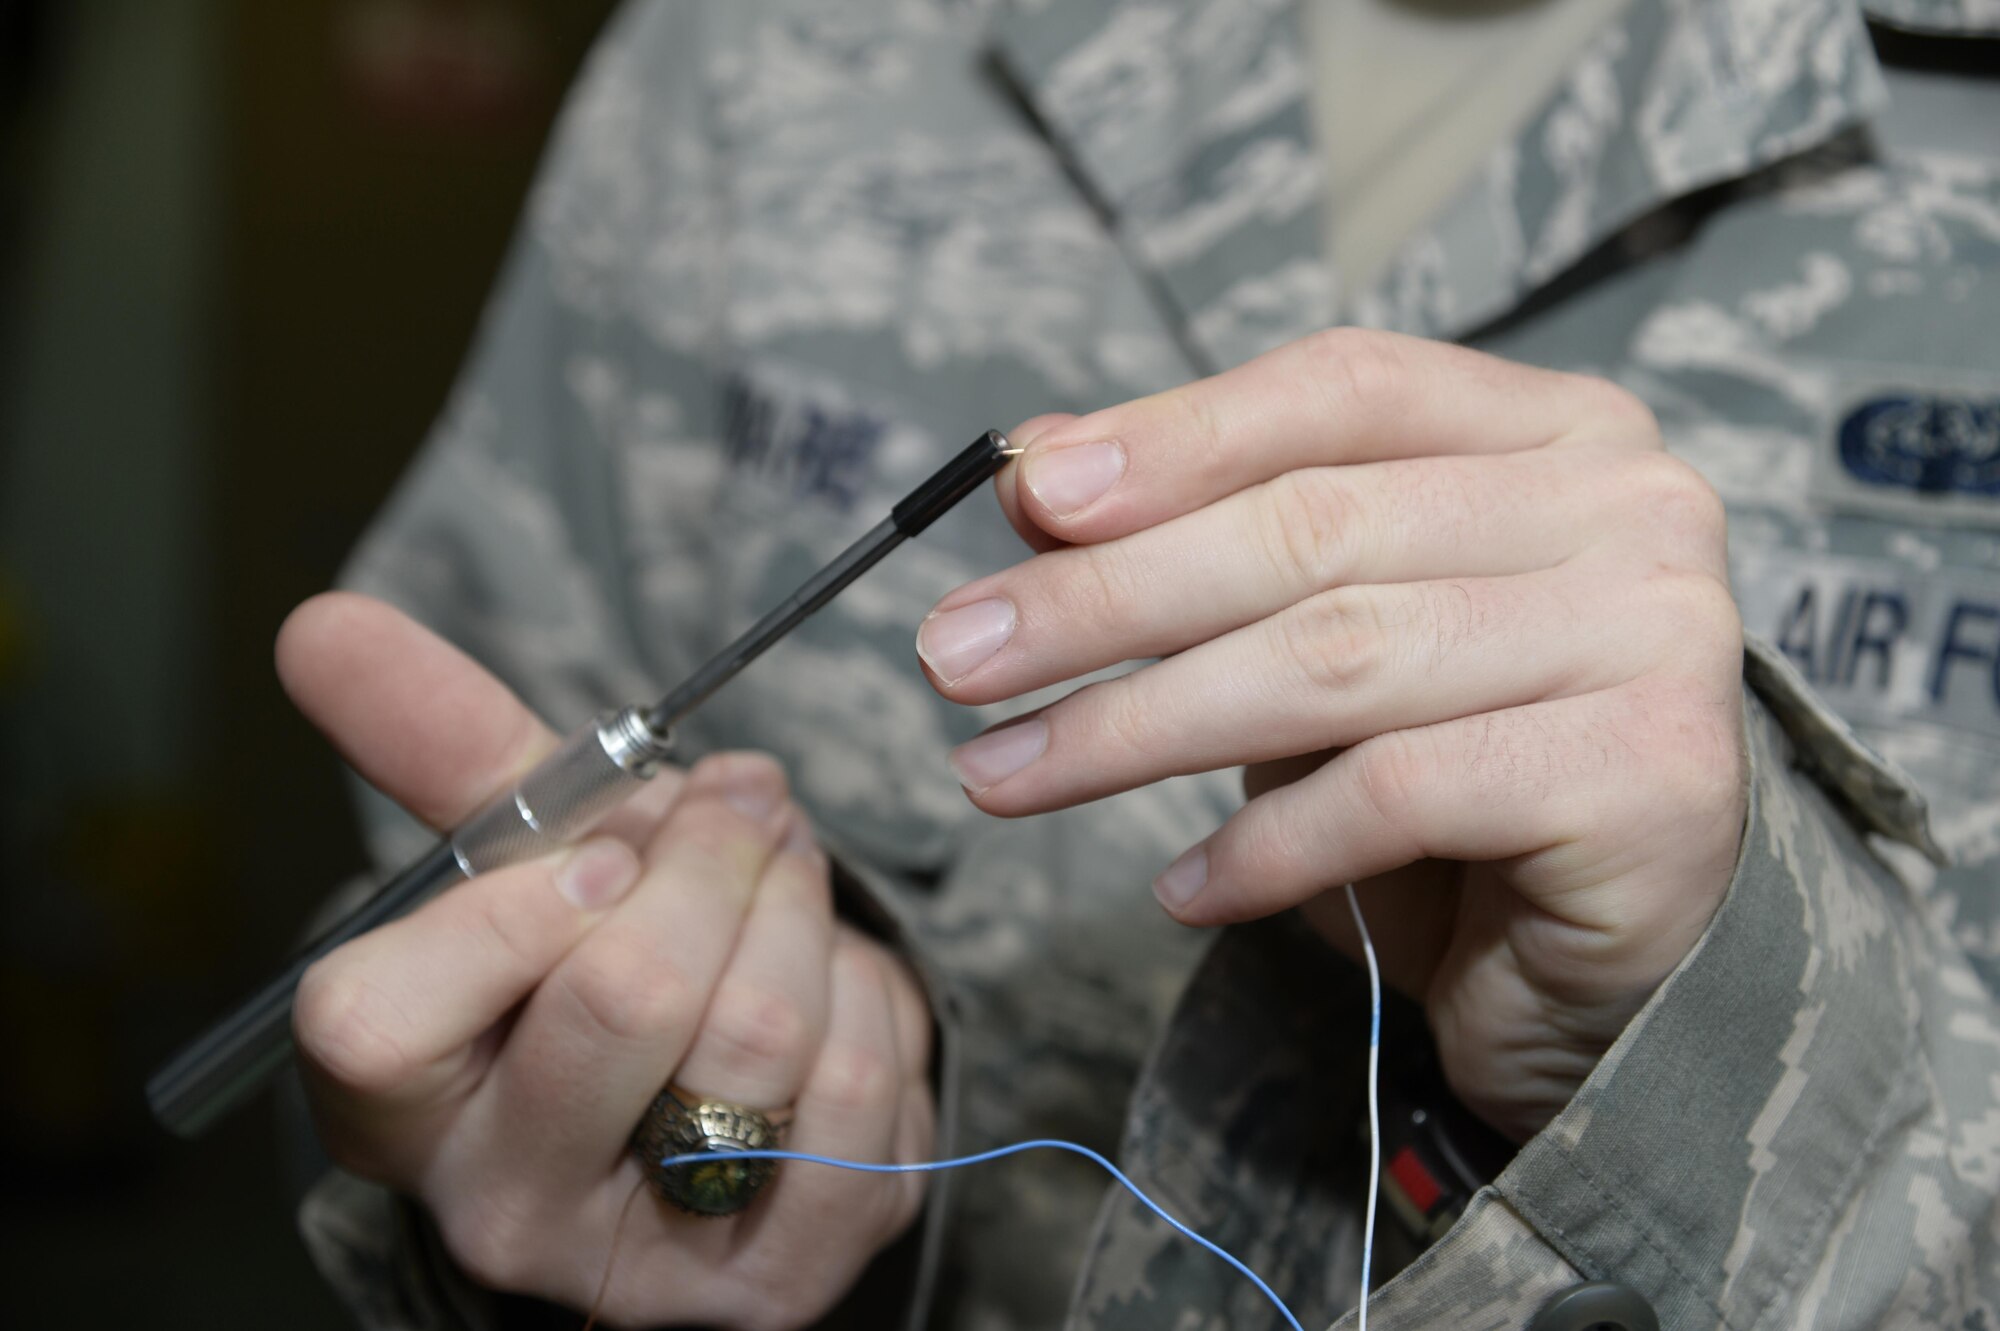 Senior Airman Christopher, client service technician, prepares wiring for a new telephone line at an undisclosed location in Southwest Asia March 30, 2015. The telephone section supports all the telephones on base that are not voice over internet protocol telephones. Christopher is currently deployed from Mountain Home Air Force Base, Idaho. (U.S. Air Force photo/Tech. Sgt. Marie Brown/RELEASED)